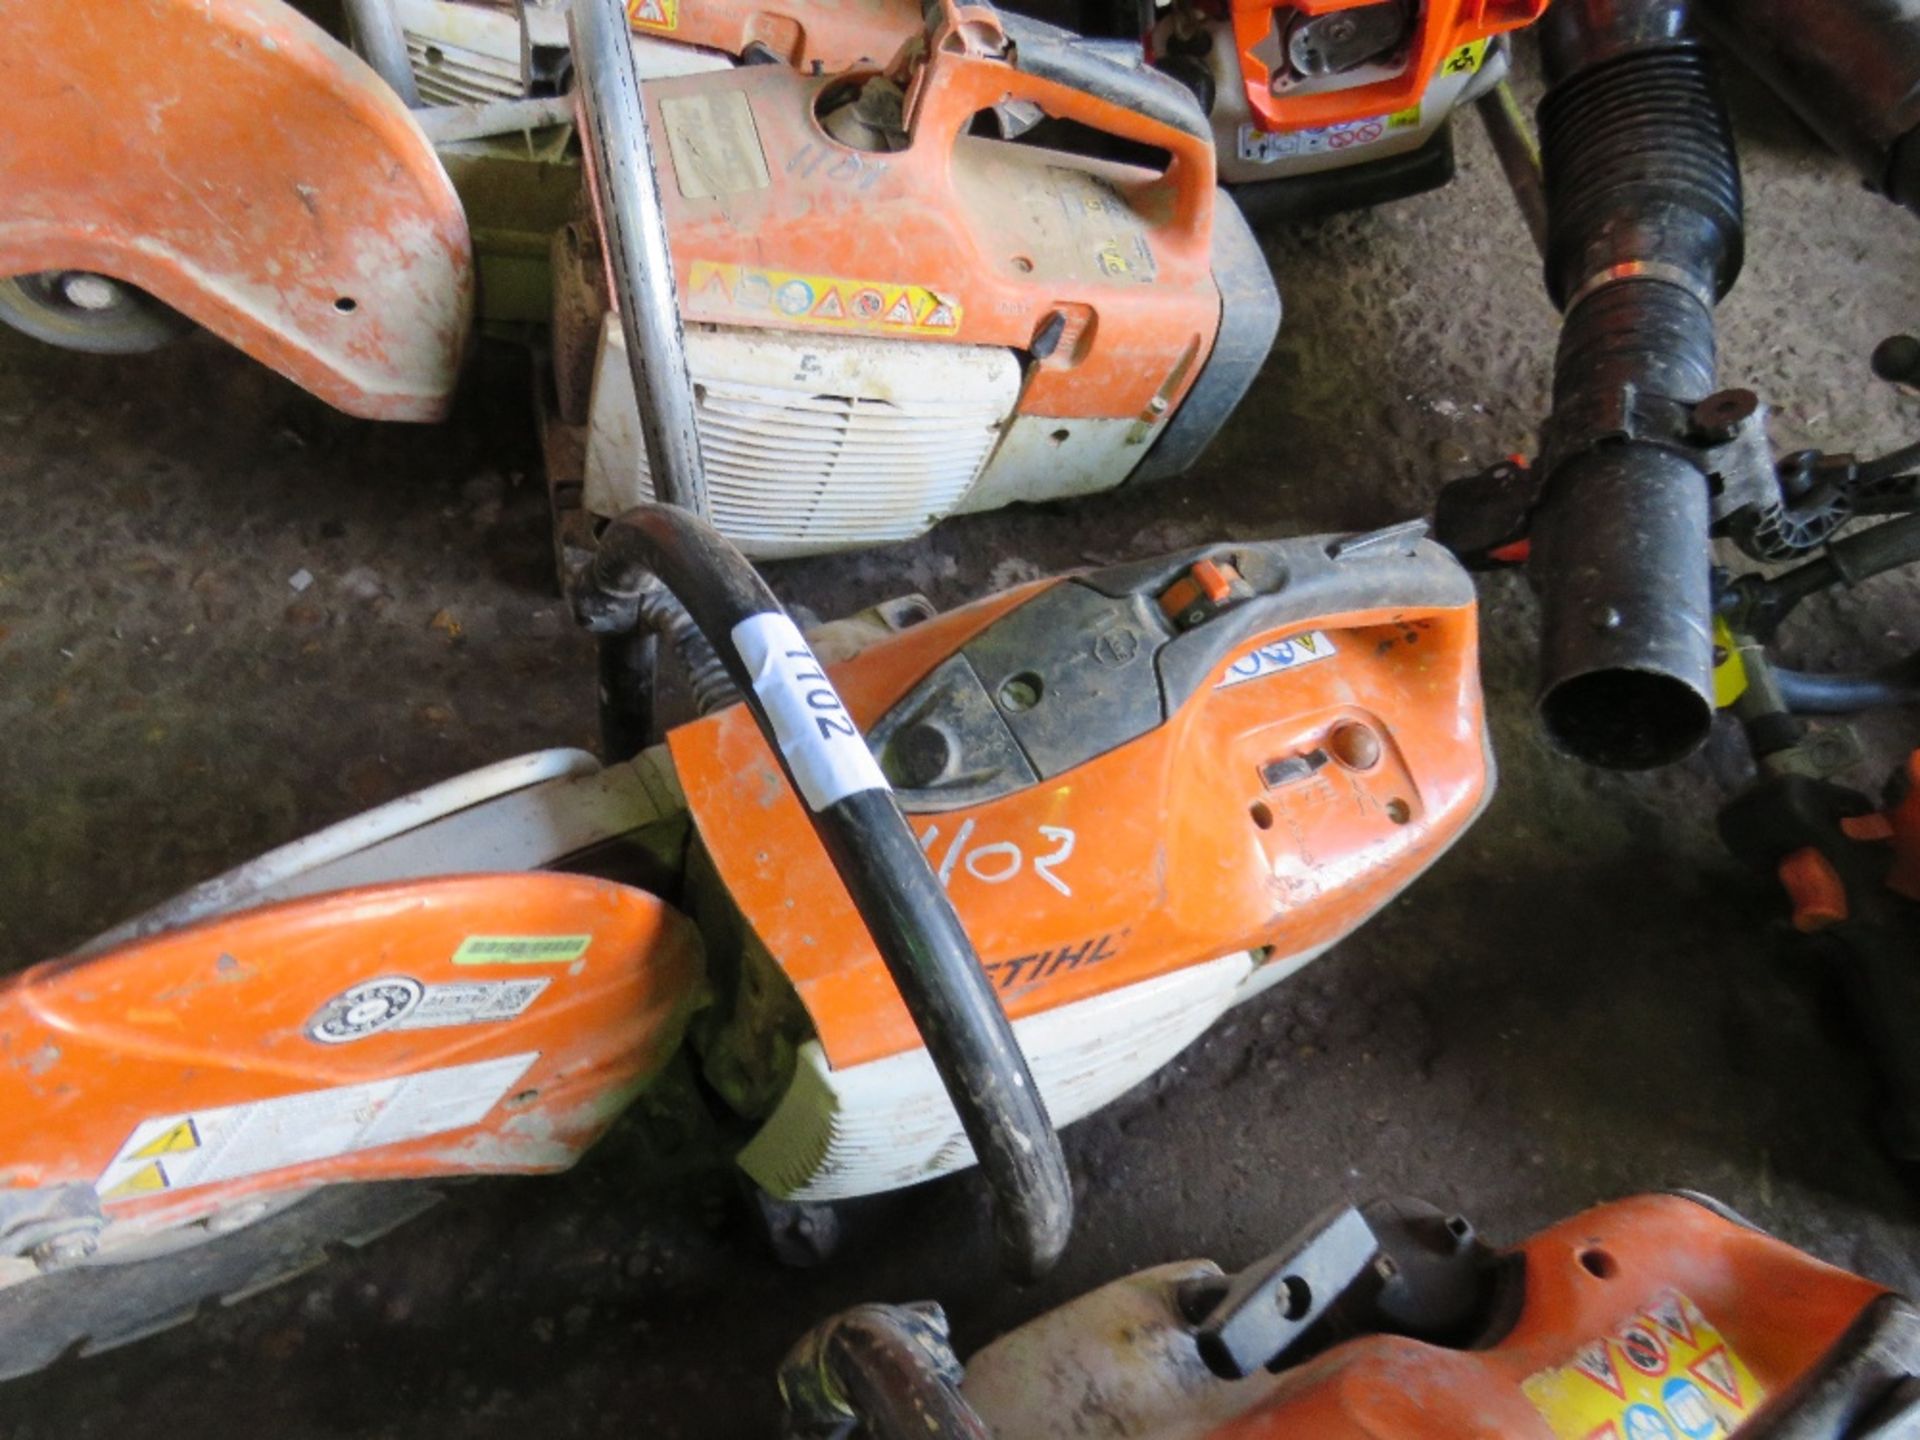 STIHL TS410 PETROL SAW. CONDITION UNKNOWN. - Image 2 of 3